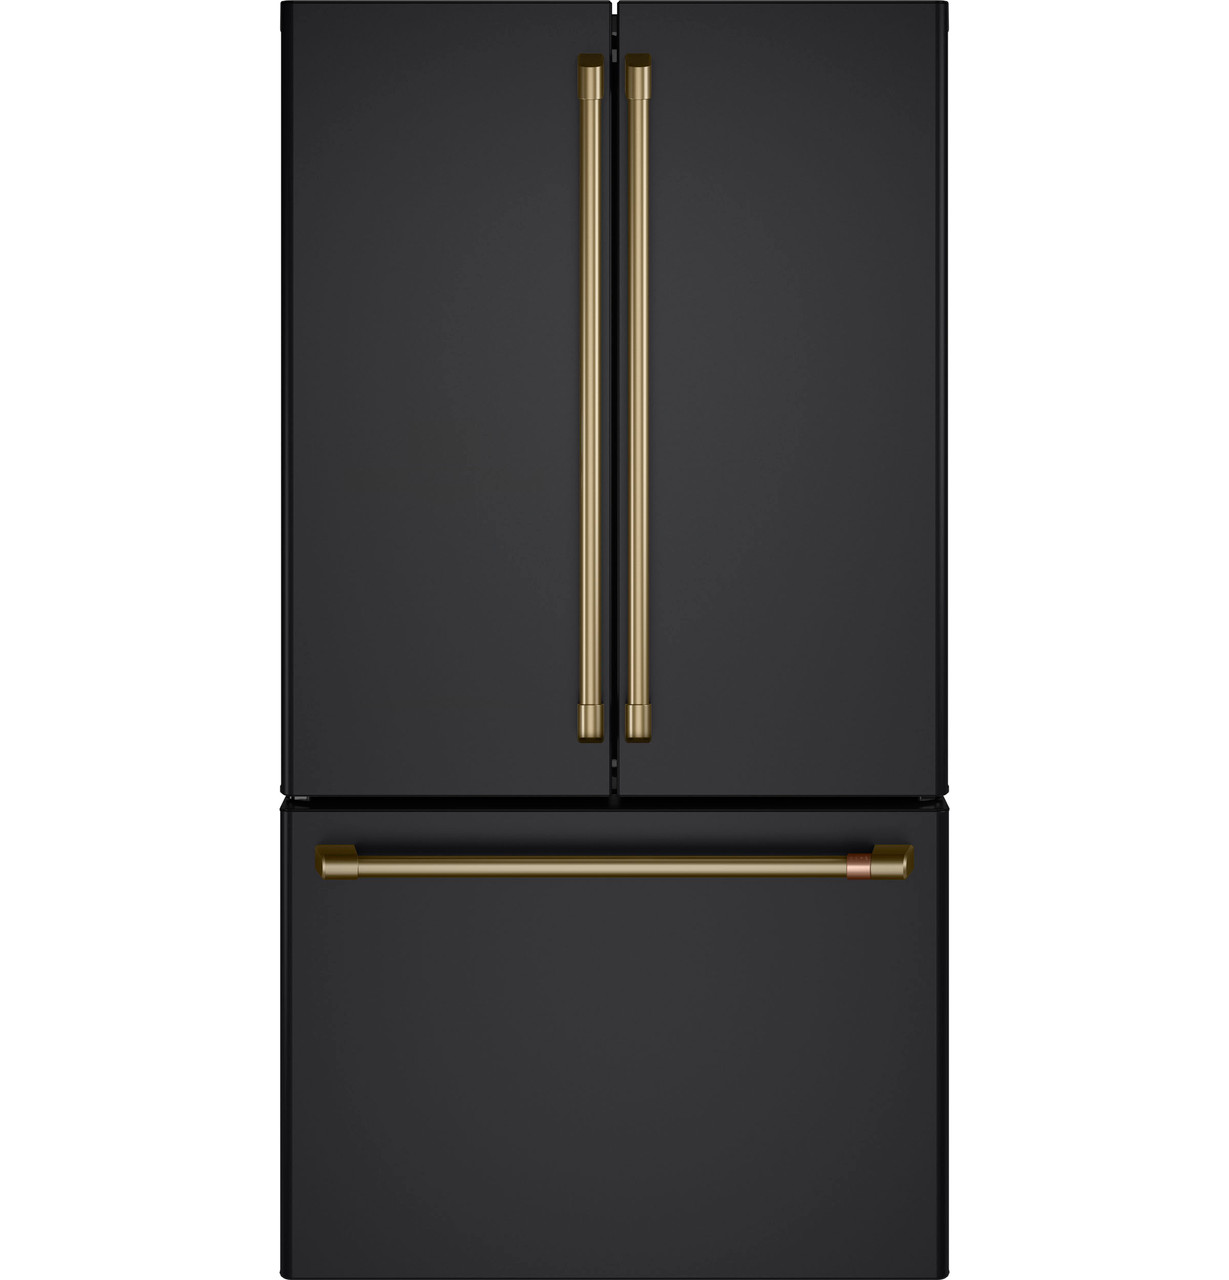 Reviews for Cafe 23.1 cu. ft. Smart French Door Refrigerator in